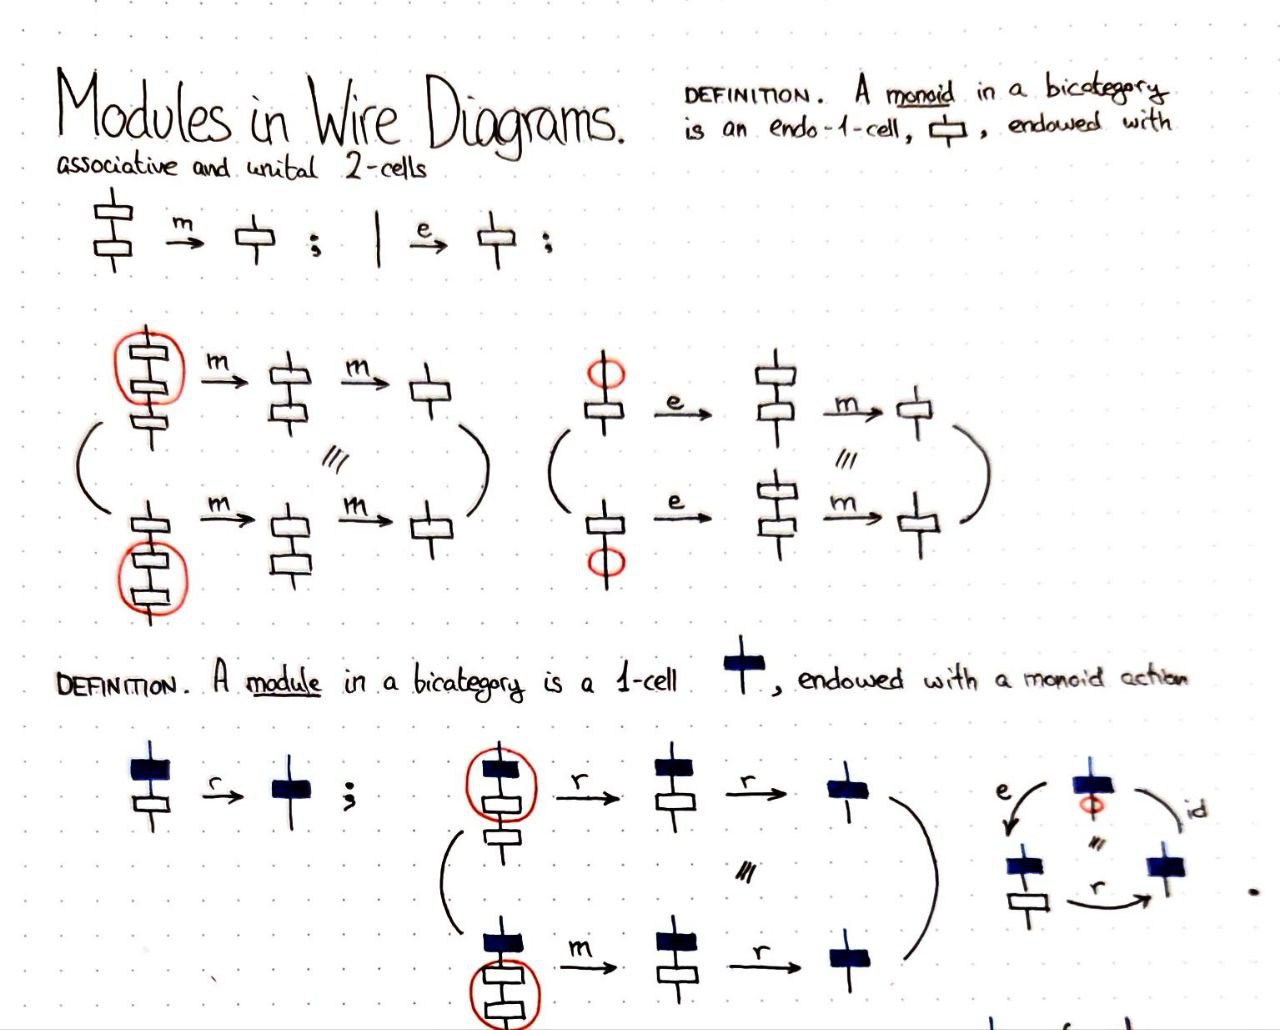 modules-in-wire-diagrams